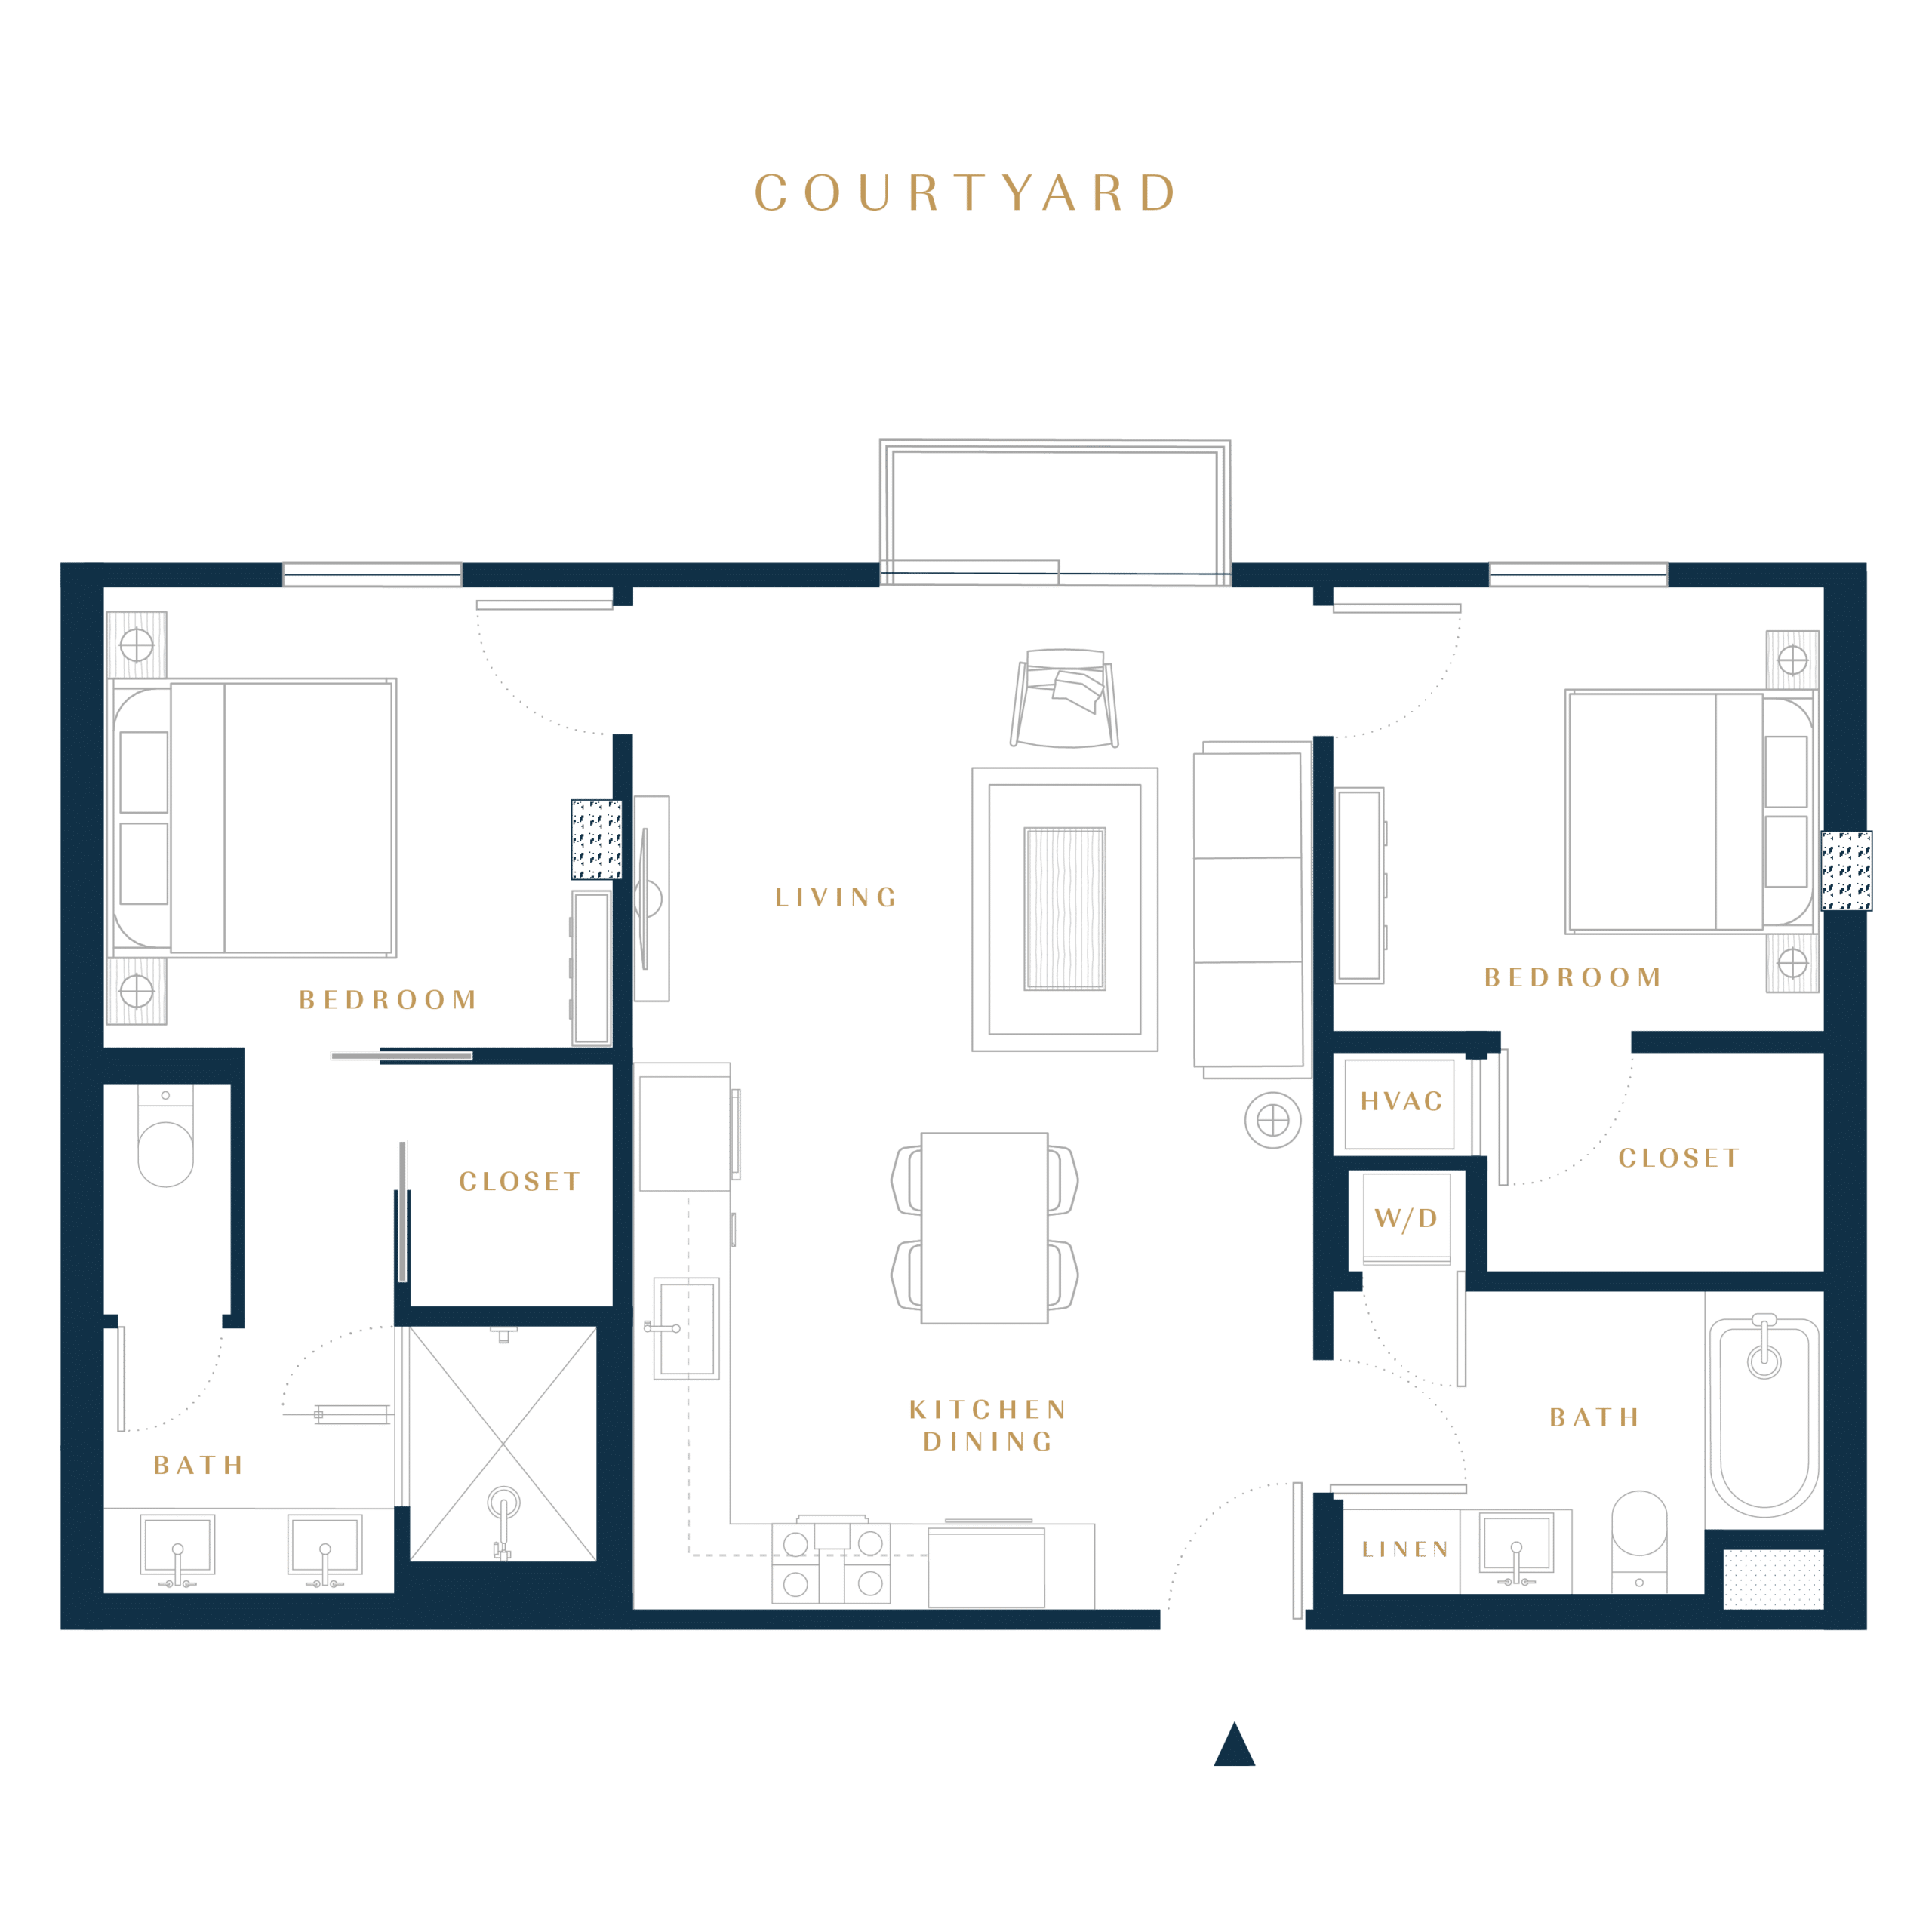 Residence 2D luxury condo floor plan in San Francisco Dogpatch